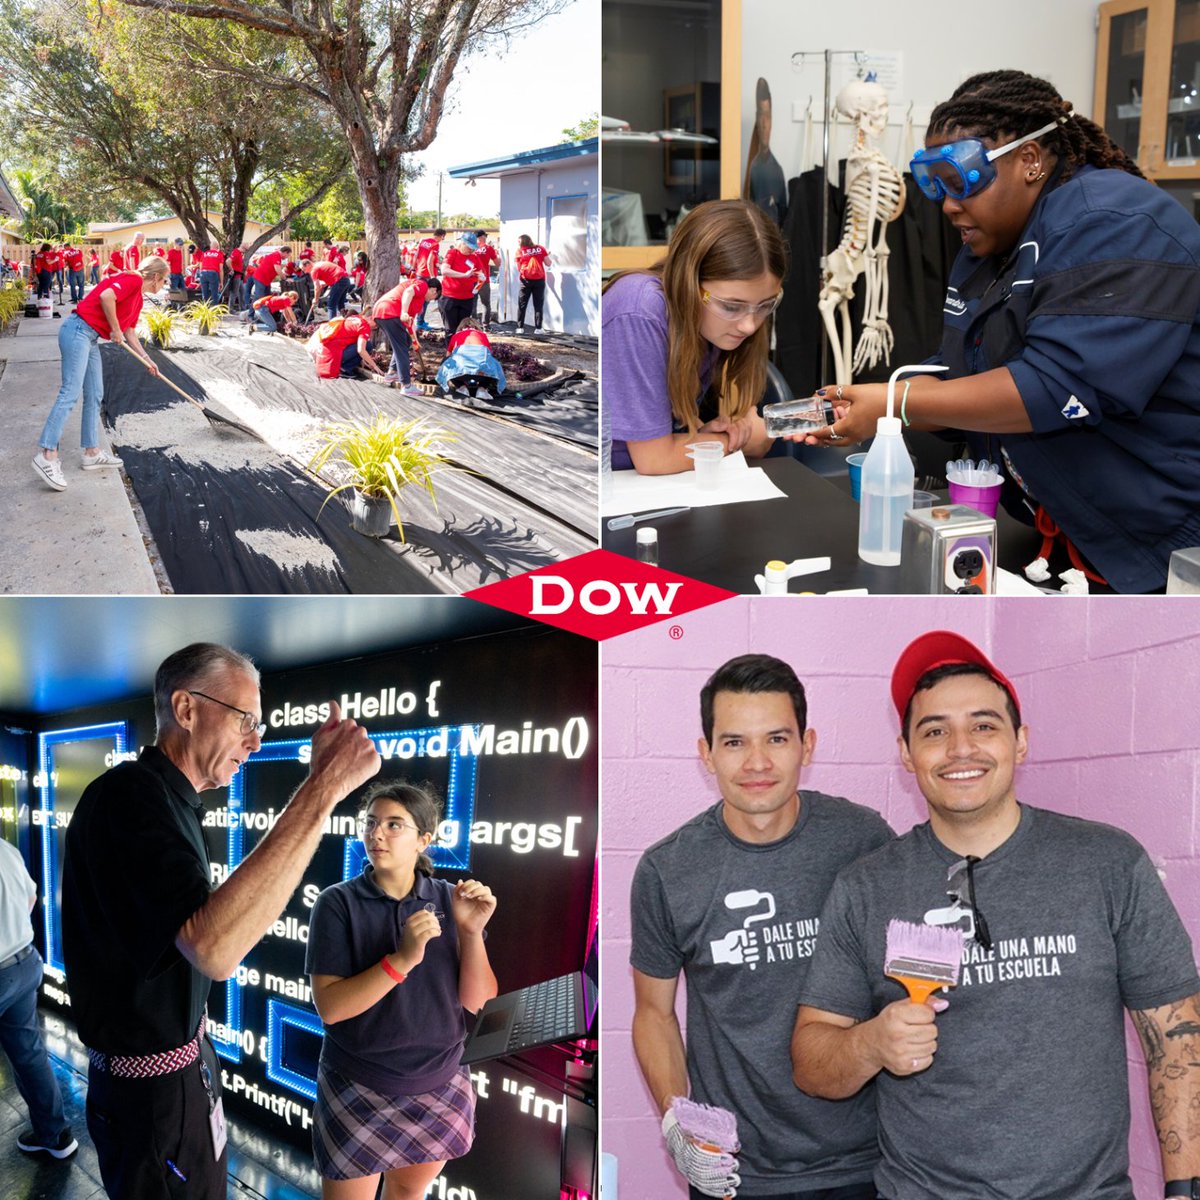 It’s #VolunteerMonth, and I’m proud to say that I and over half of my #TeamDow colleagues #volunteer to help make a difference in our communities. 

How do you choose to give back?